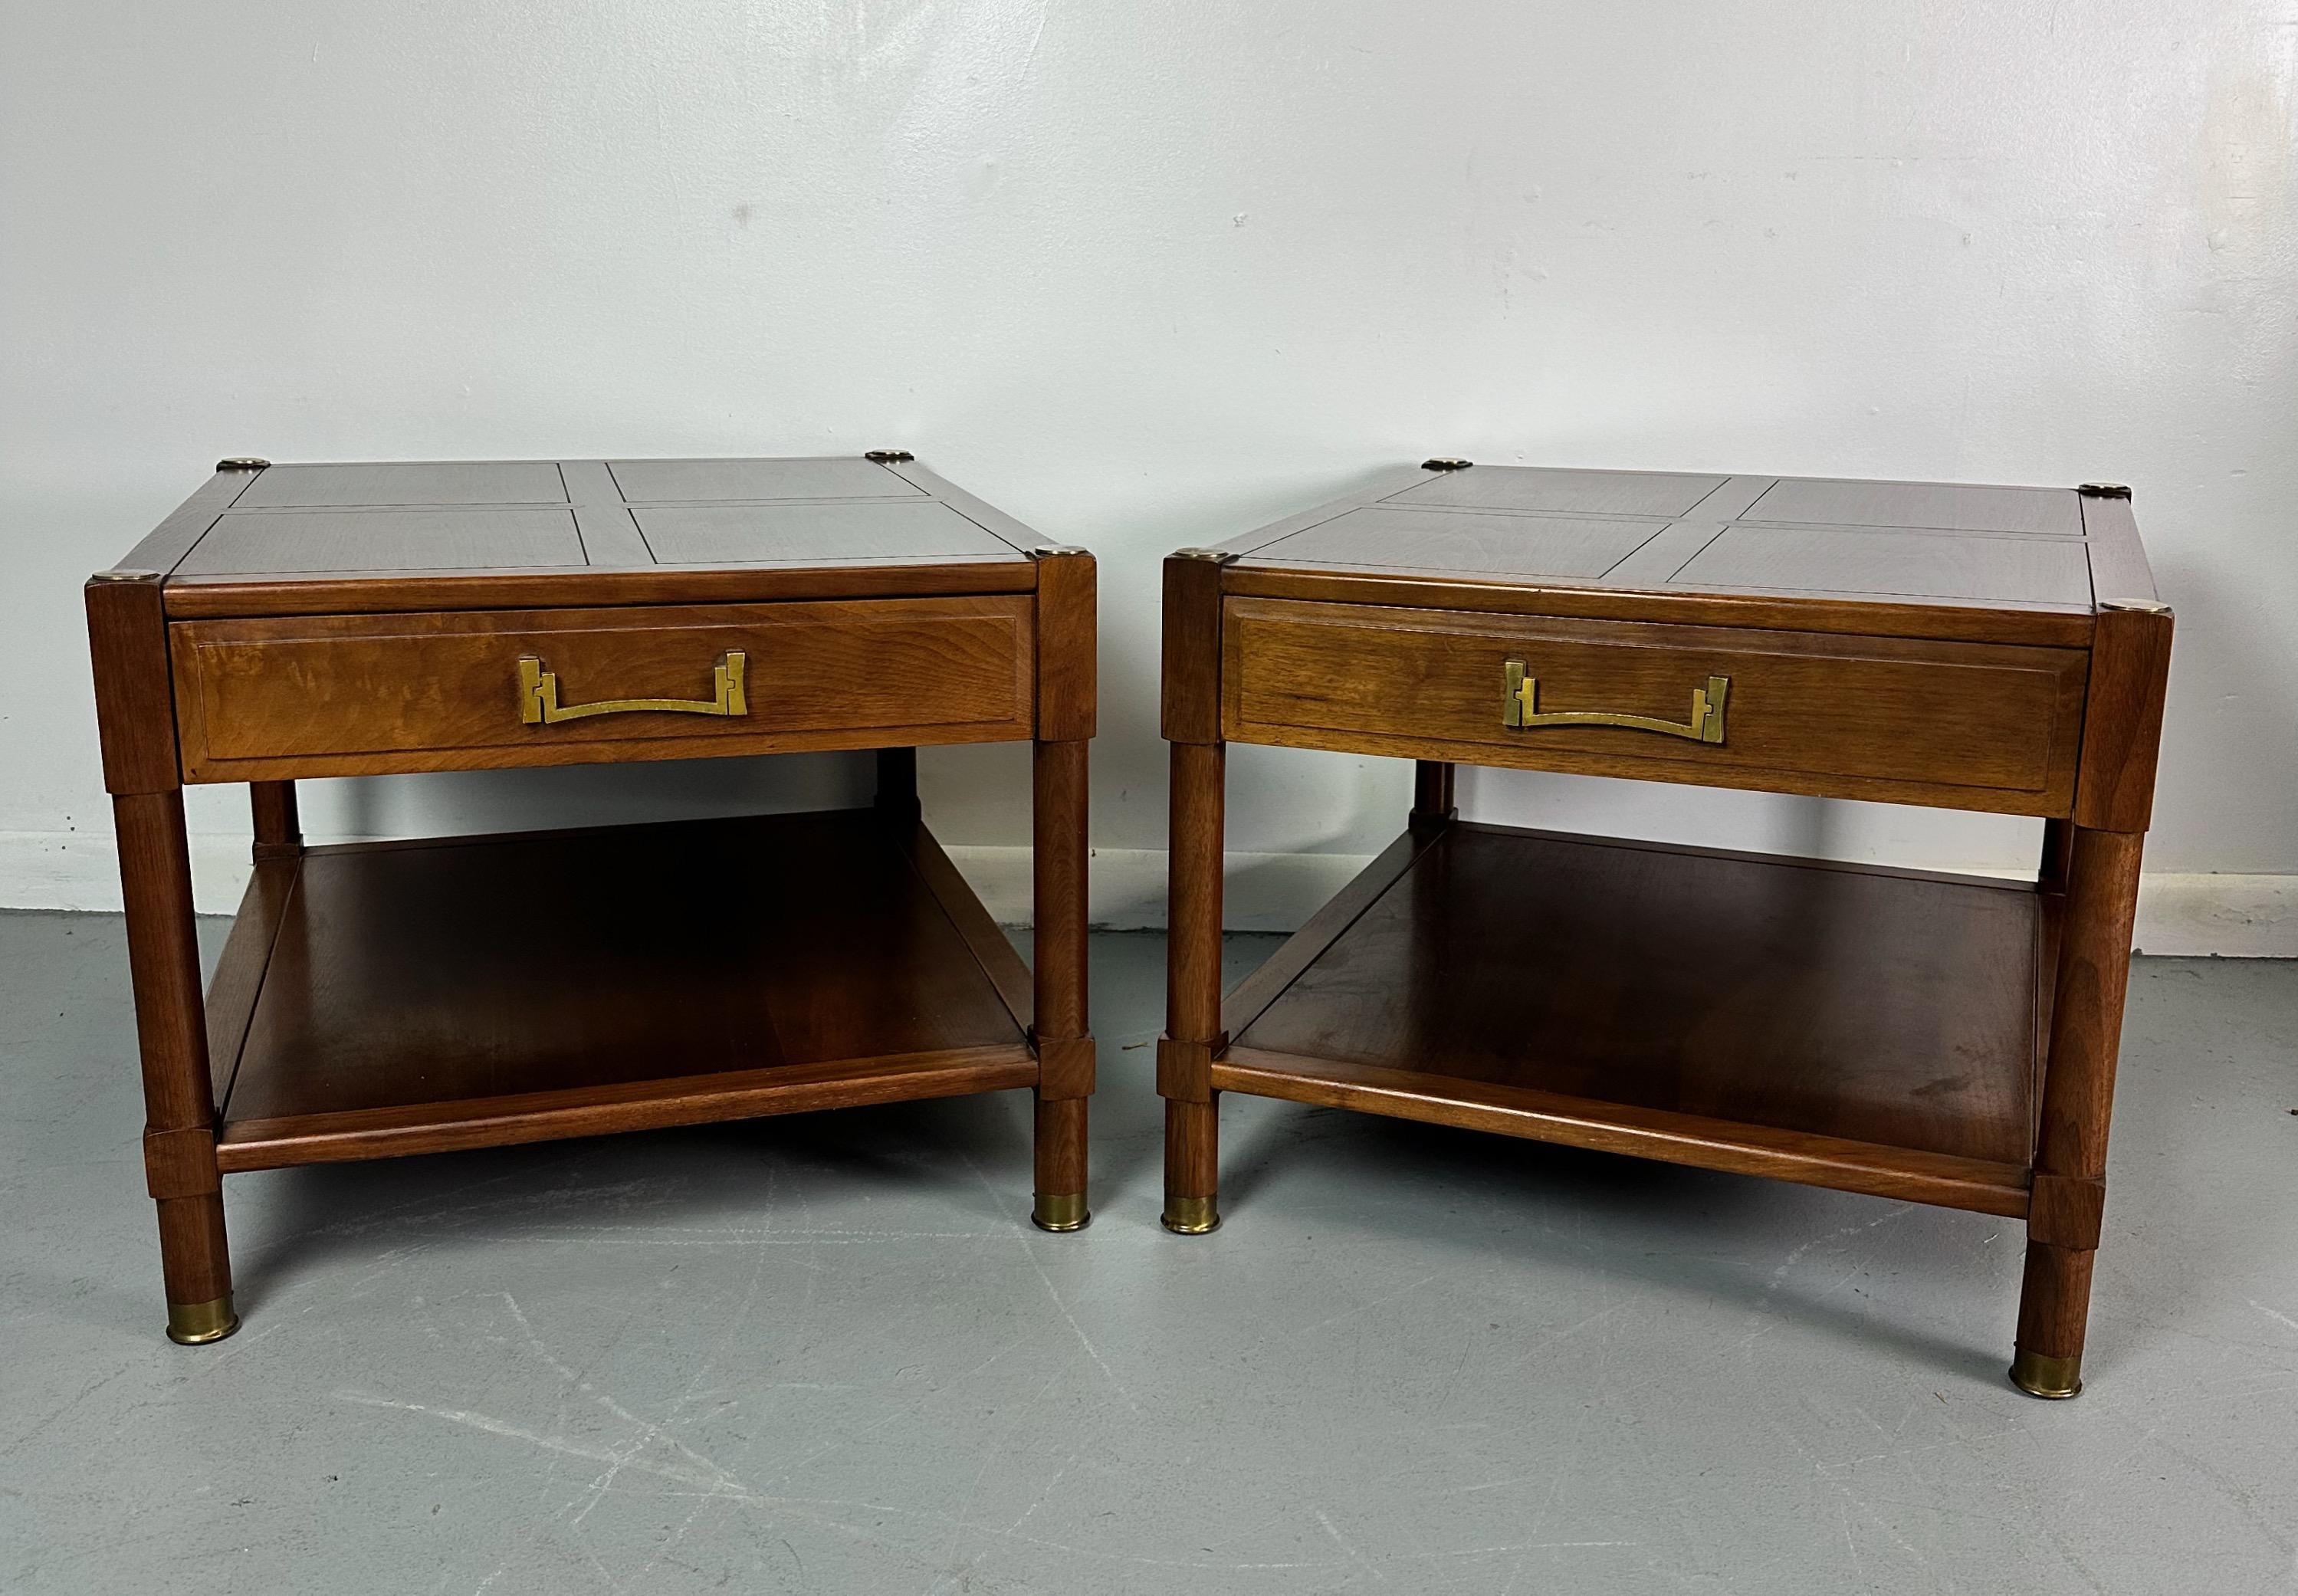 Sophisticated pair of walnut nightstands that have been designed with a bit of an asian flair. These wonderful pieces are crafted out of beautifully grained walnut and accented with brass fixtures and pulls. 